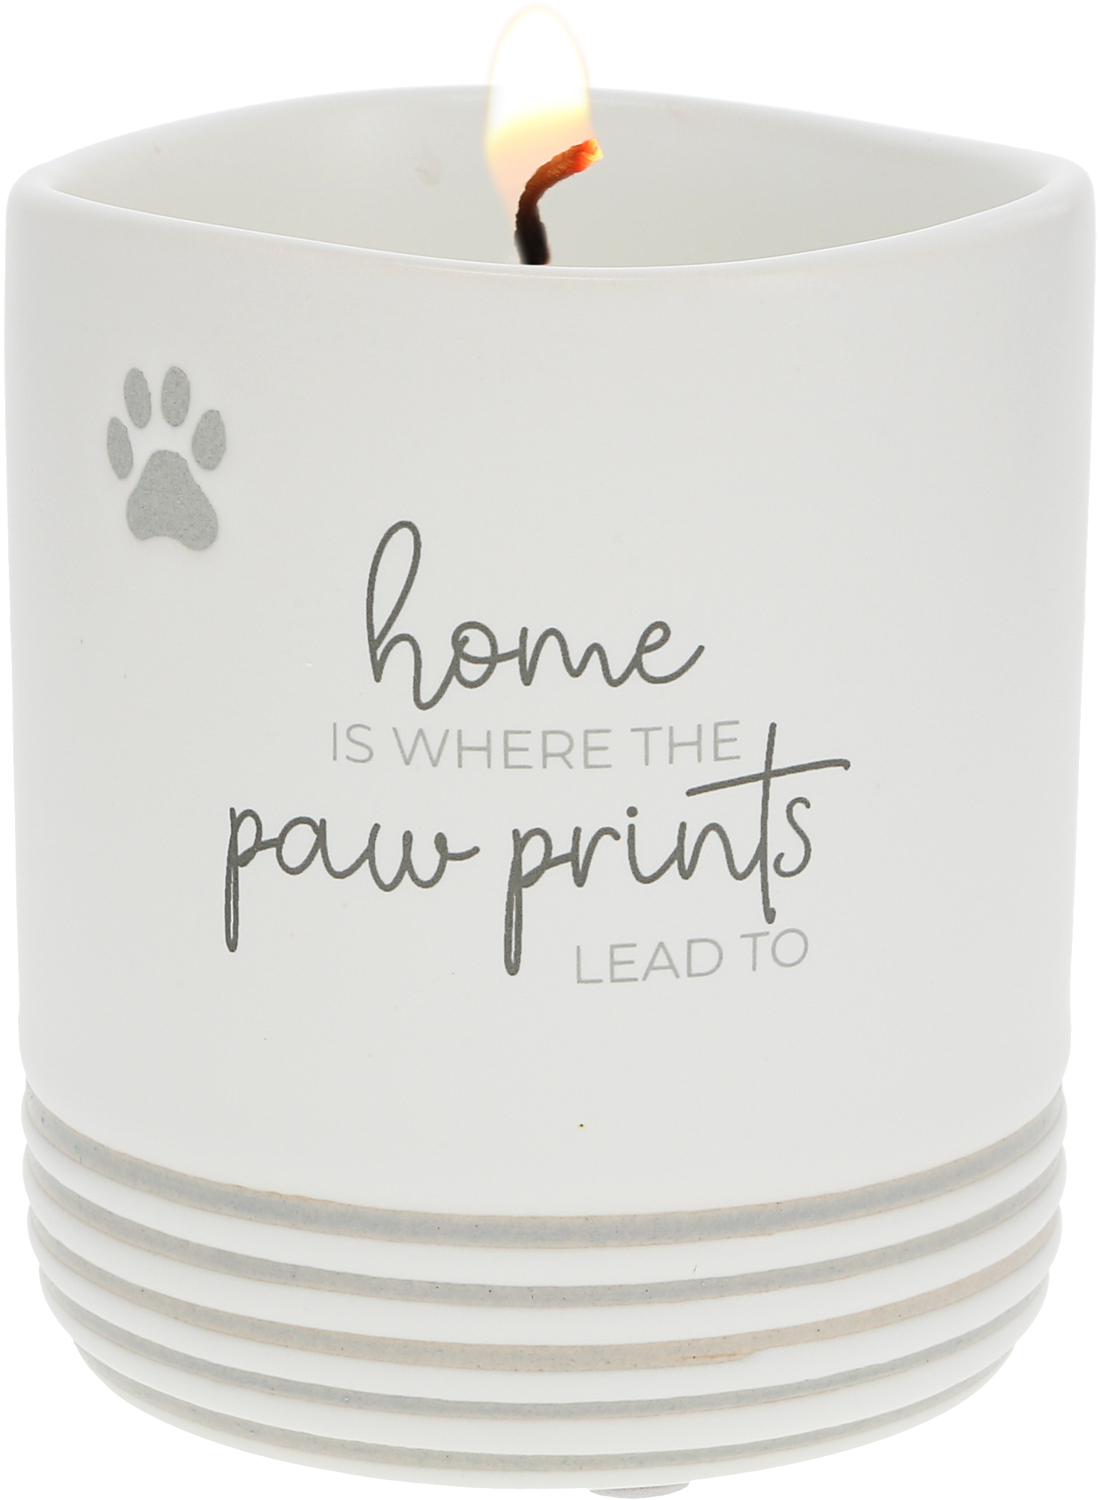 Home by Furever Pawsome - Home - 10 oz - 100% Soy Wax Reveal Candle
Scent: Tranquility